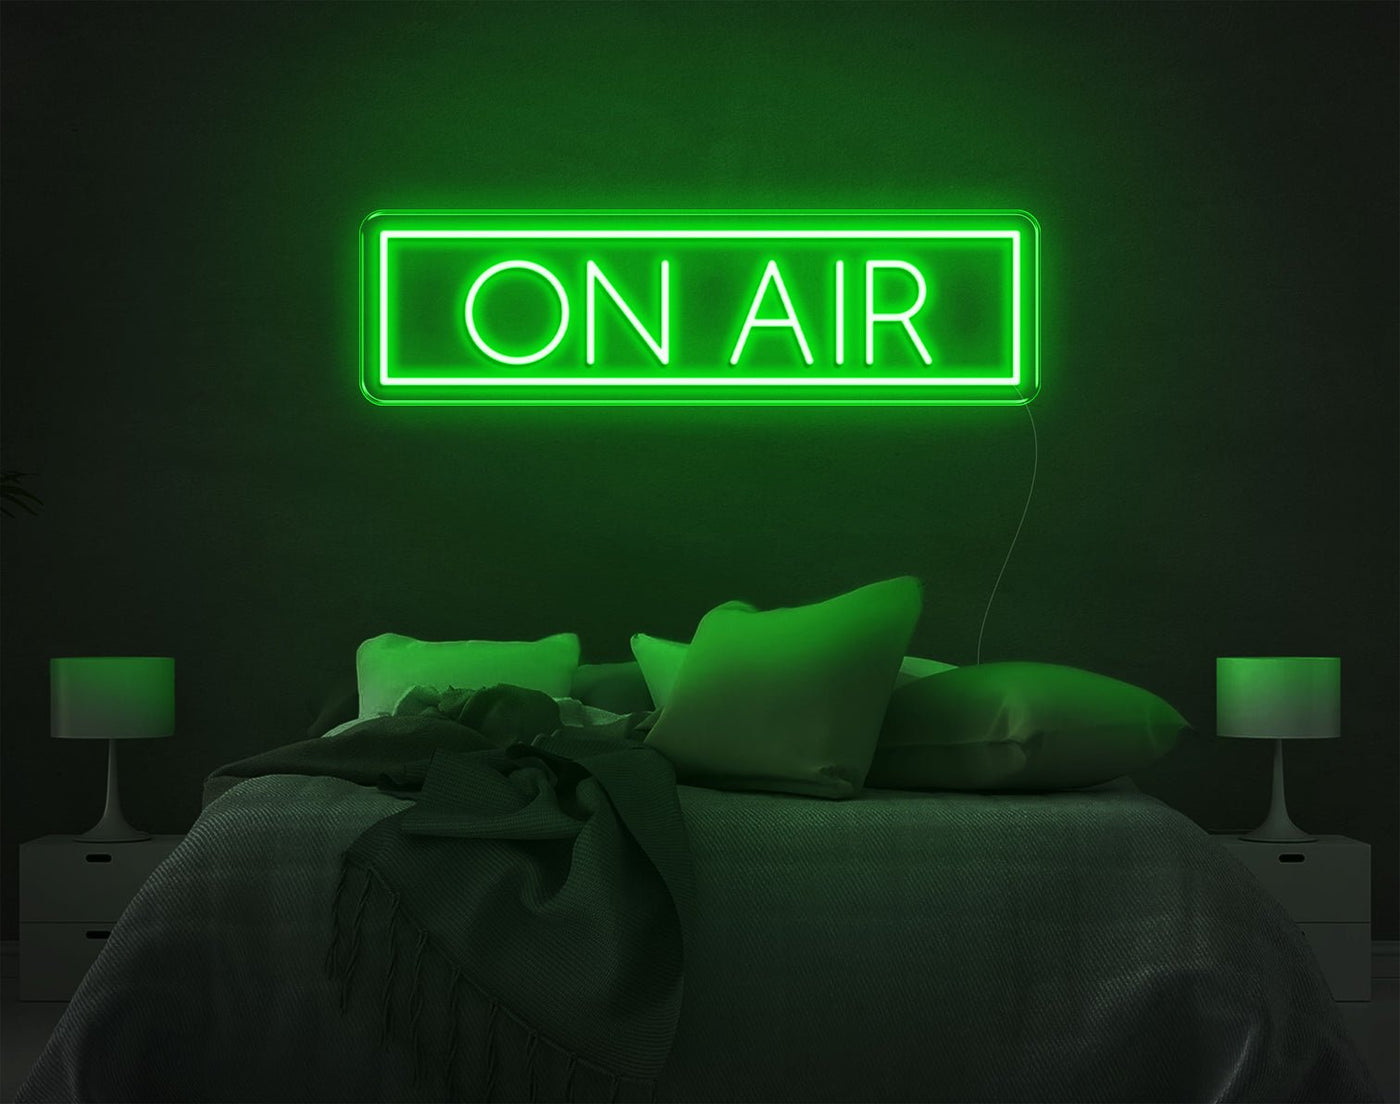 On Air LED Neon Sign - 8inch x 27inchGreen